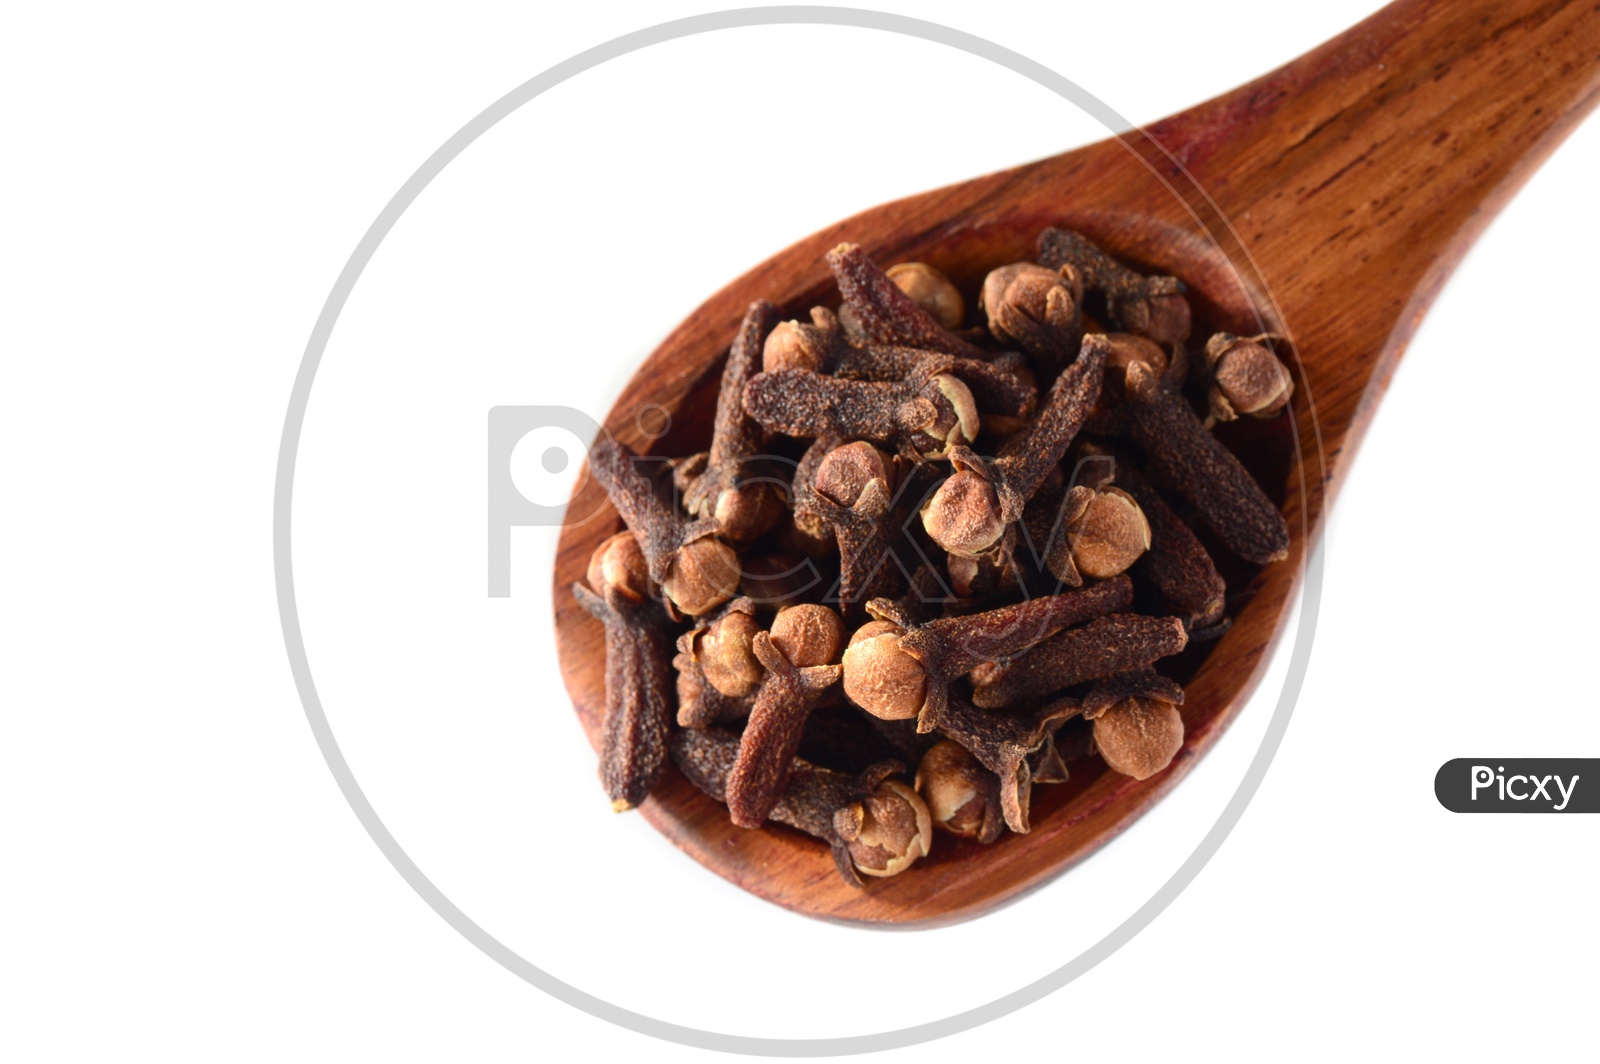 Cloves Or Indian Spice Cloves Composition Shot With Wooden Spoon On An Isolated White Background